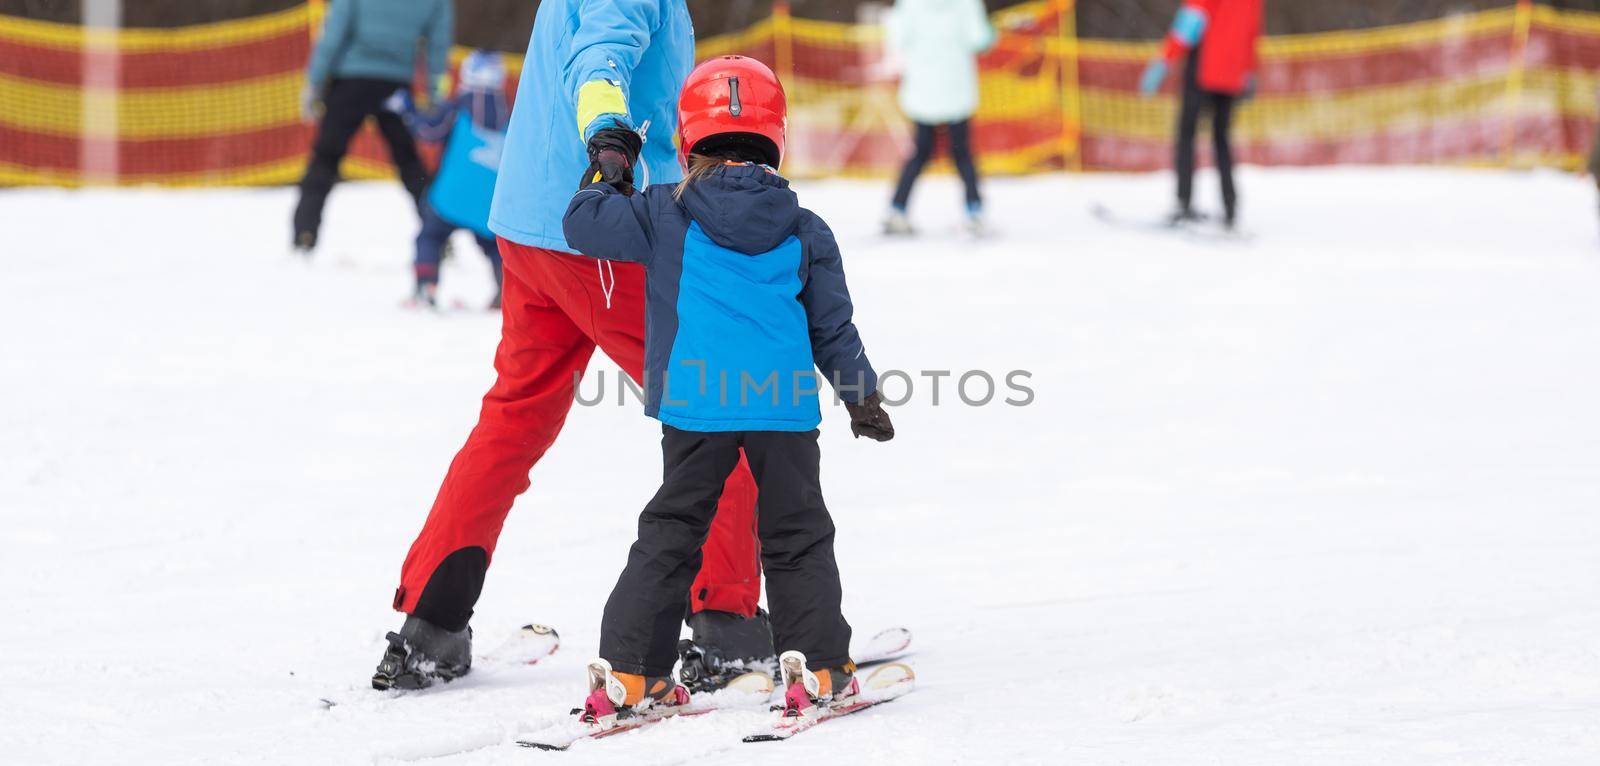 skiing master class for kids with instructor in winter sports school for children. by Andelov13